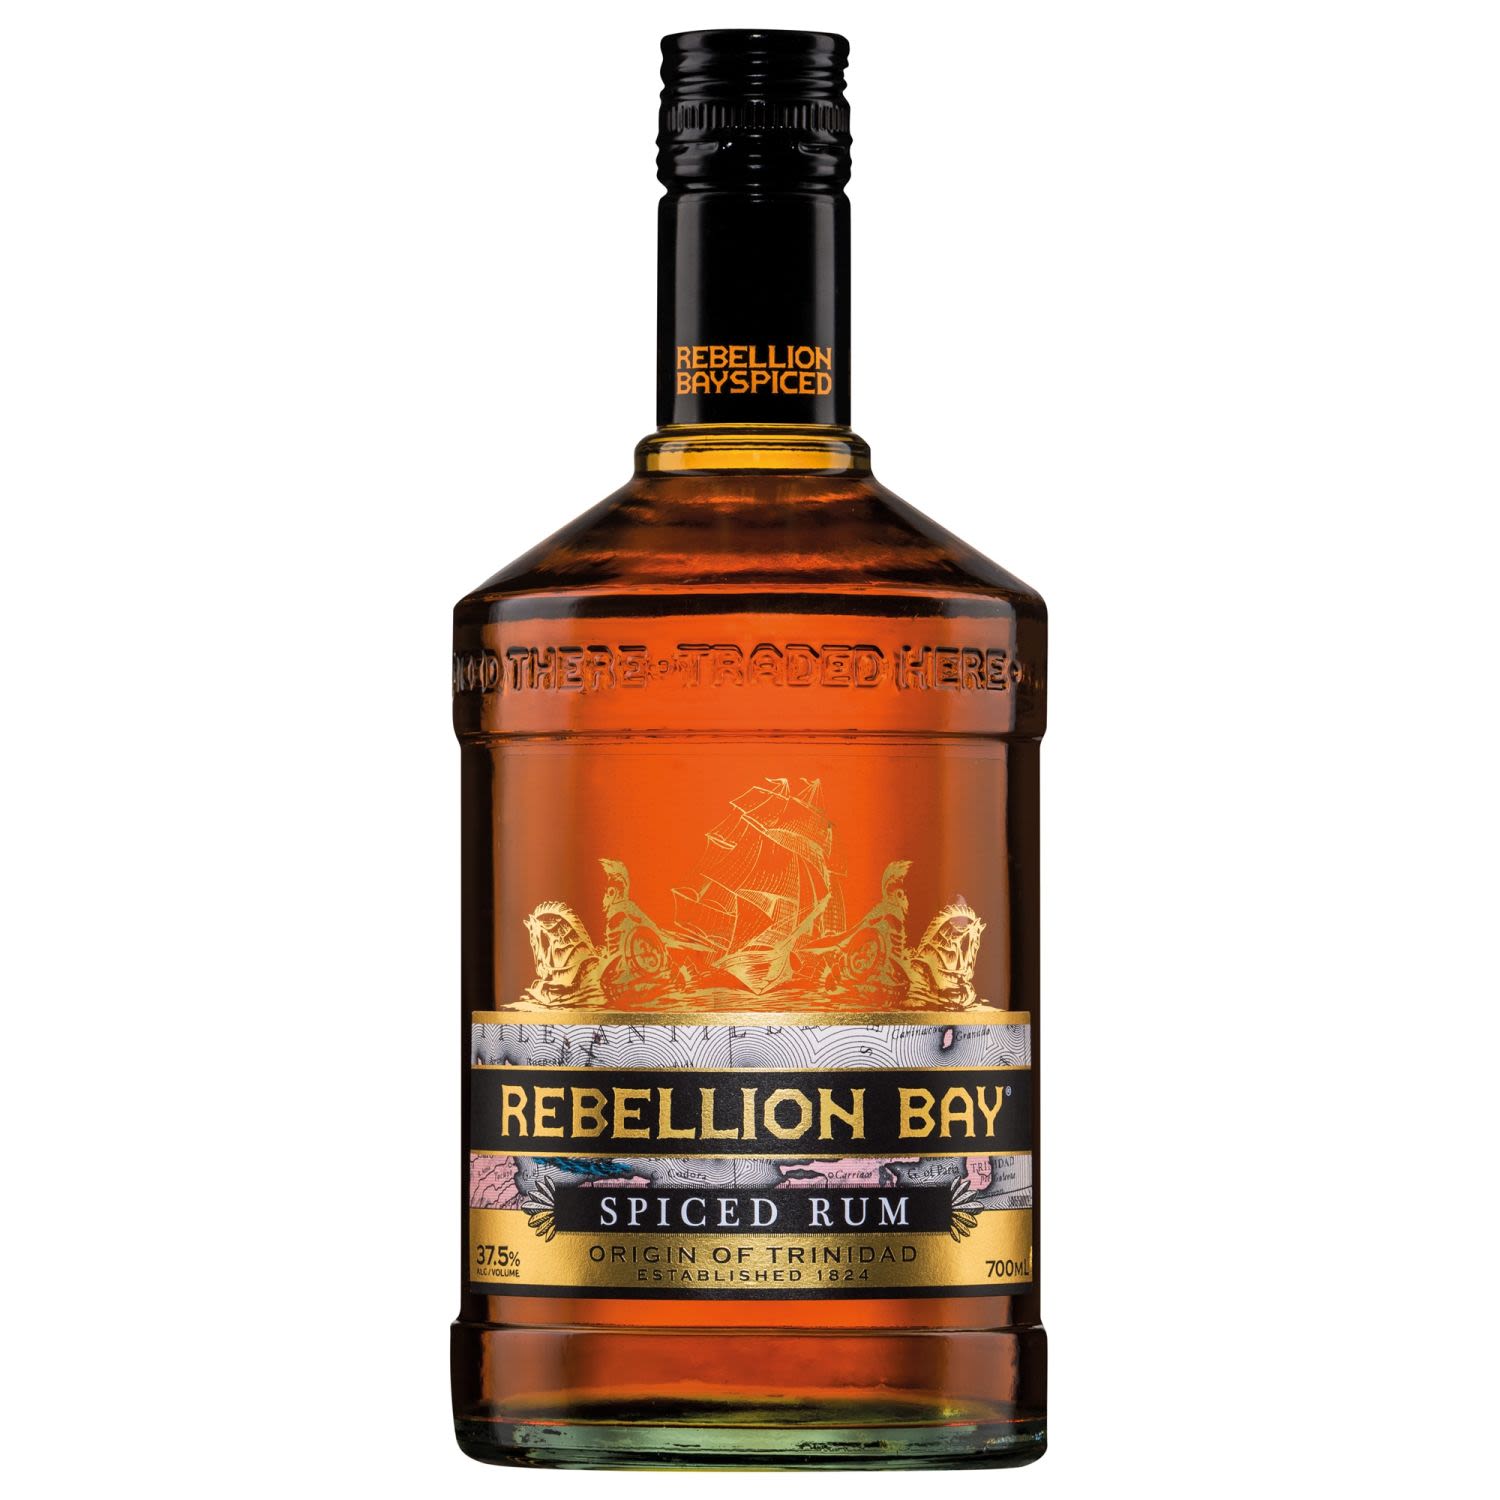 Rebellion Bay Rum is imported from Trinidad in the heart of the Caribbean and is inspired by adventures that began in the early 1800s. Naturally smooth with notes of sweet vanilla and smoky oak, Rebellion Bay Spiced Rum is ideally served neat, yet is wonderfully suited to be being mixed with dry or cola for a refreshing change. Spiced there - Traded here.<br /> <br />Alcohol Volume: 37.50%<br /><br />Pack Format: Bottle<br /><br />Standard Drinks: 20.7</br /><br />Pack Type: Bottle<br /><br />Country of Origin: Trinidad and Tobago<br />